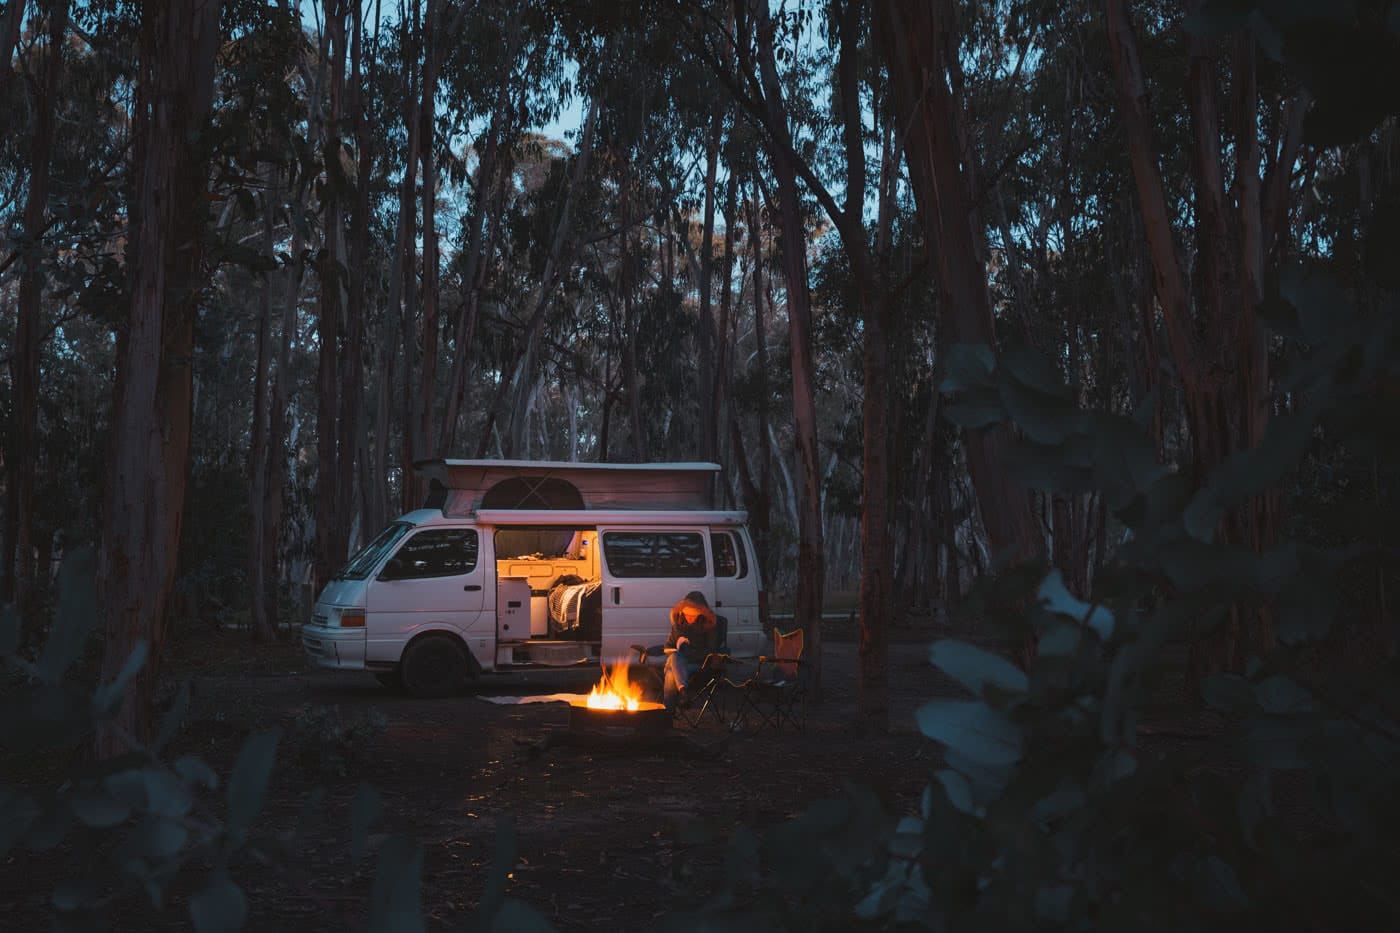 5 Camping Getaways Near Adelaide Jack Brookes, campsite, van, campfire, forest